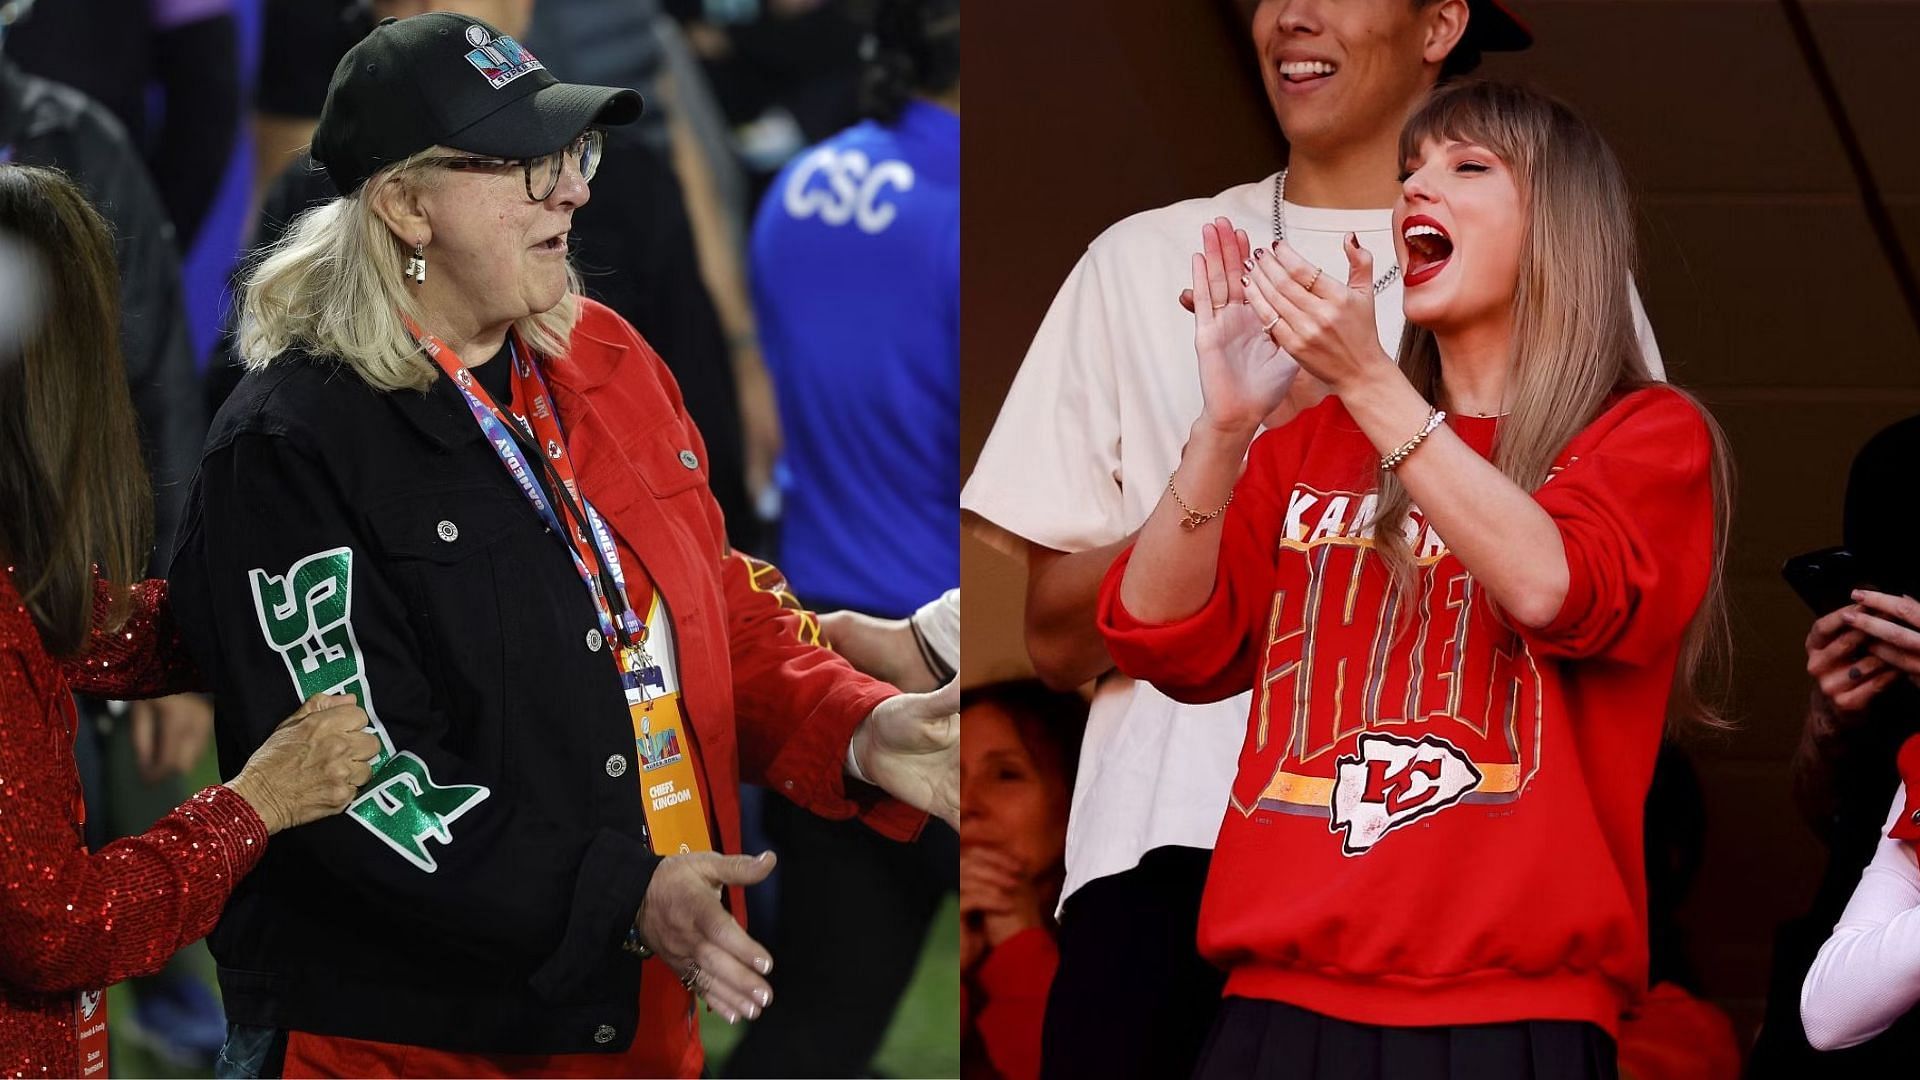 Donna Kelce reacts to watching Taylor Swift